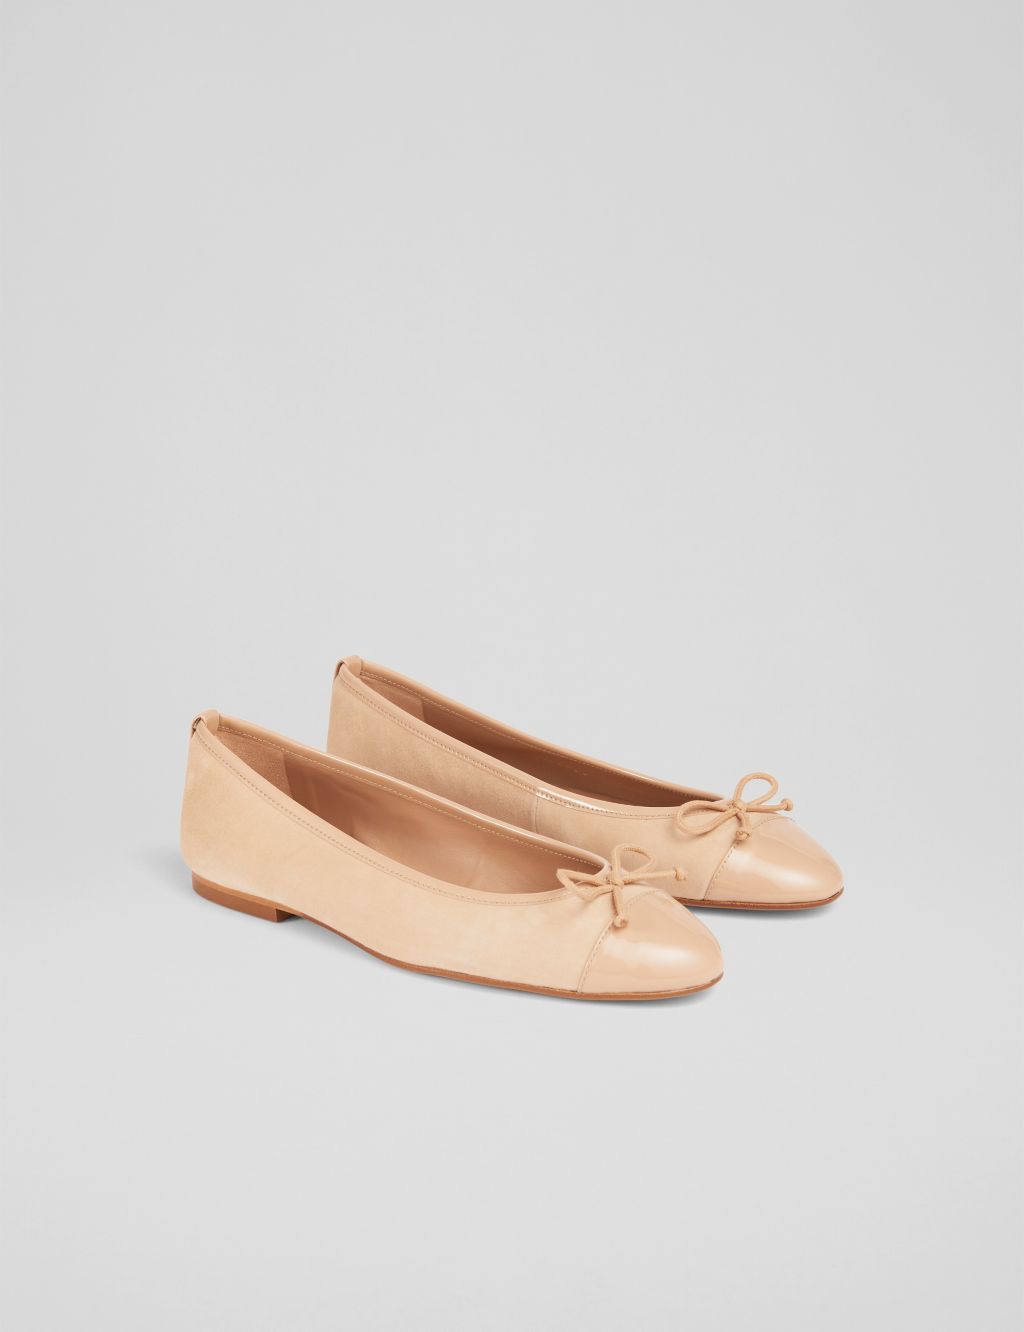 Leather Bow Slip On Ballet Pumps 4 of 4